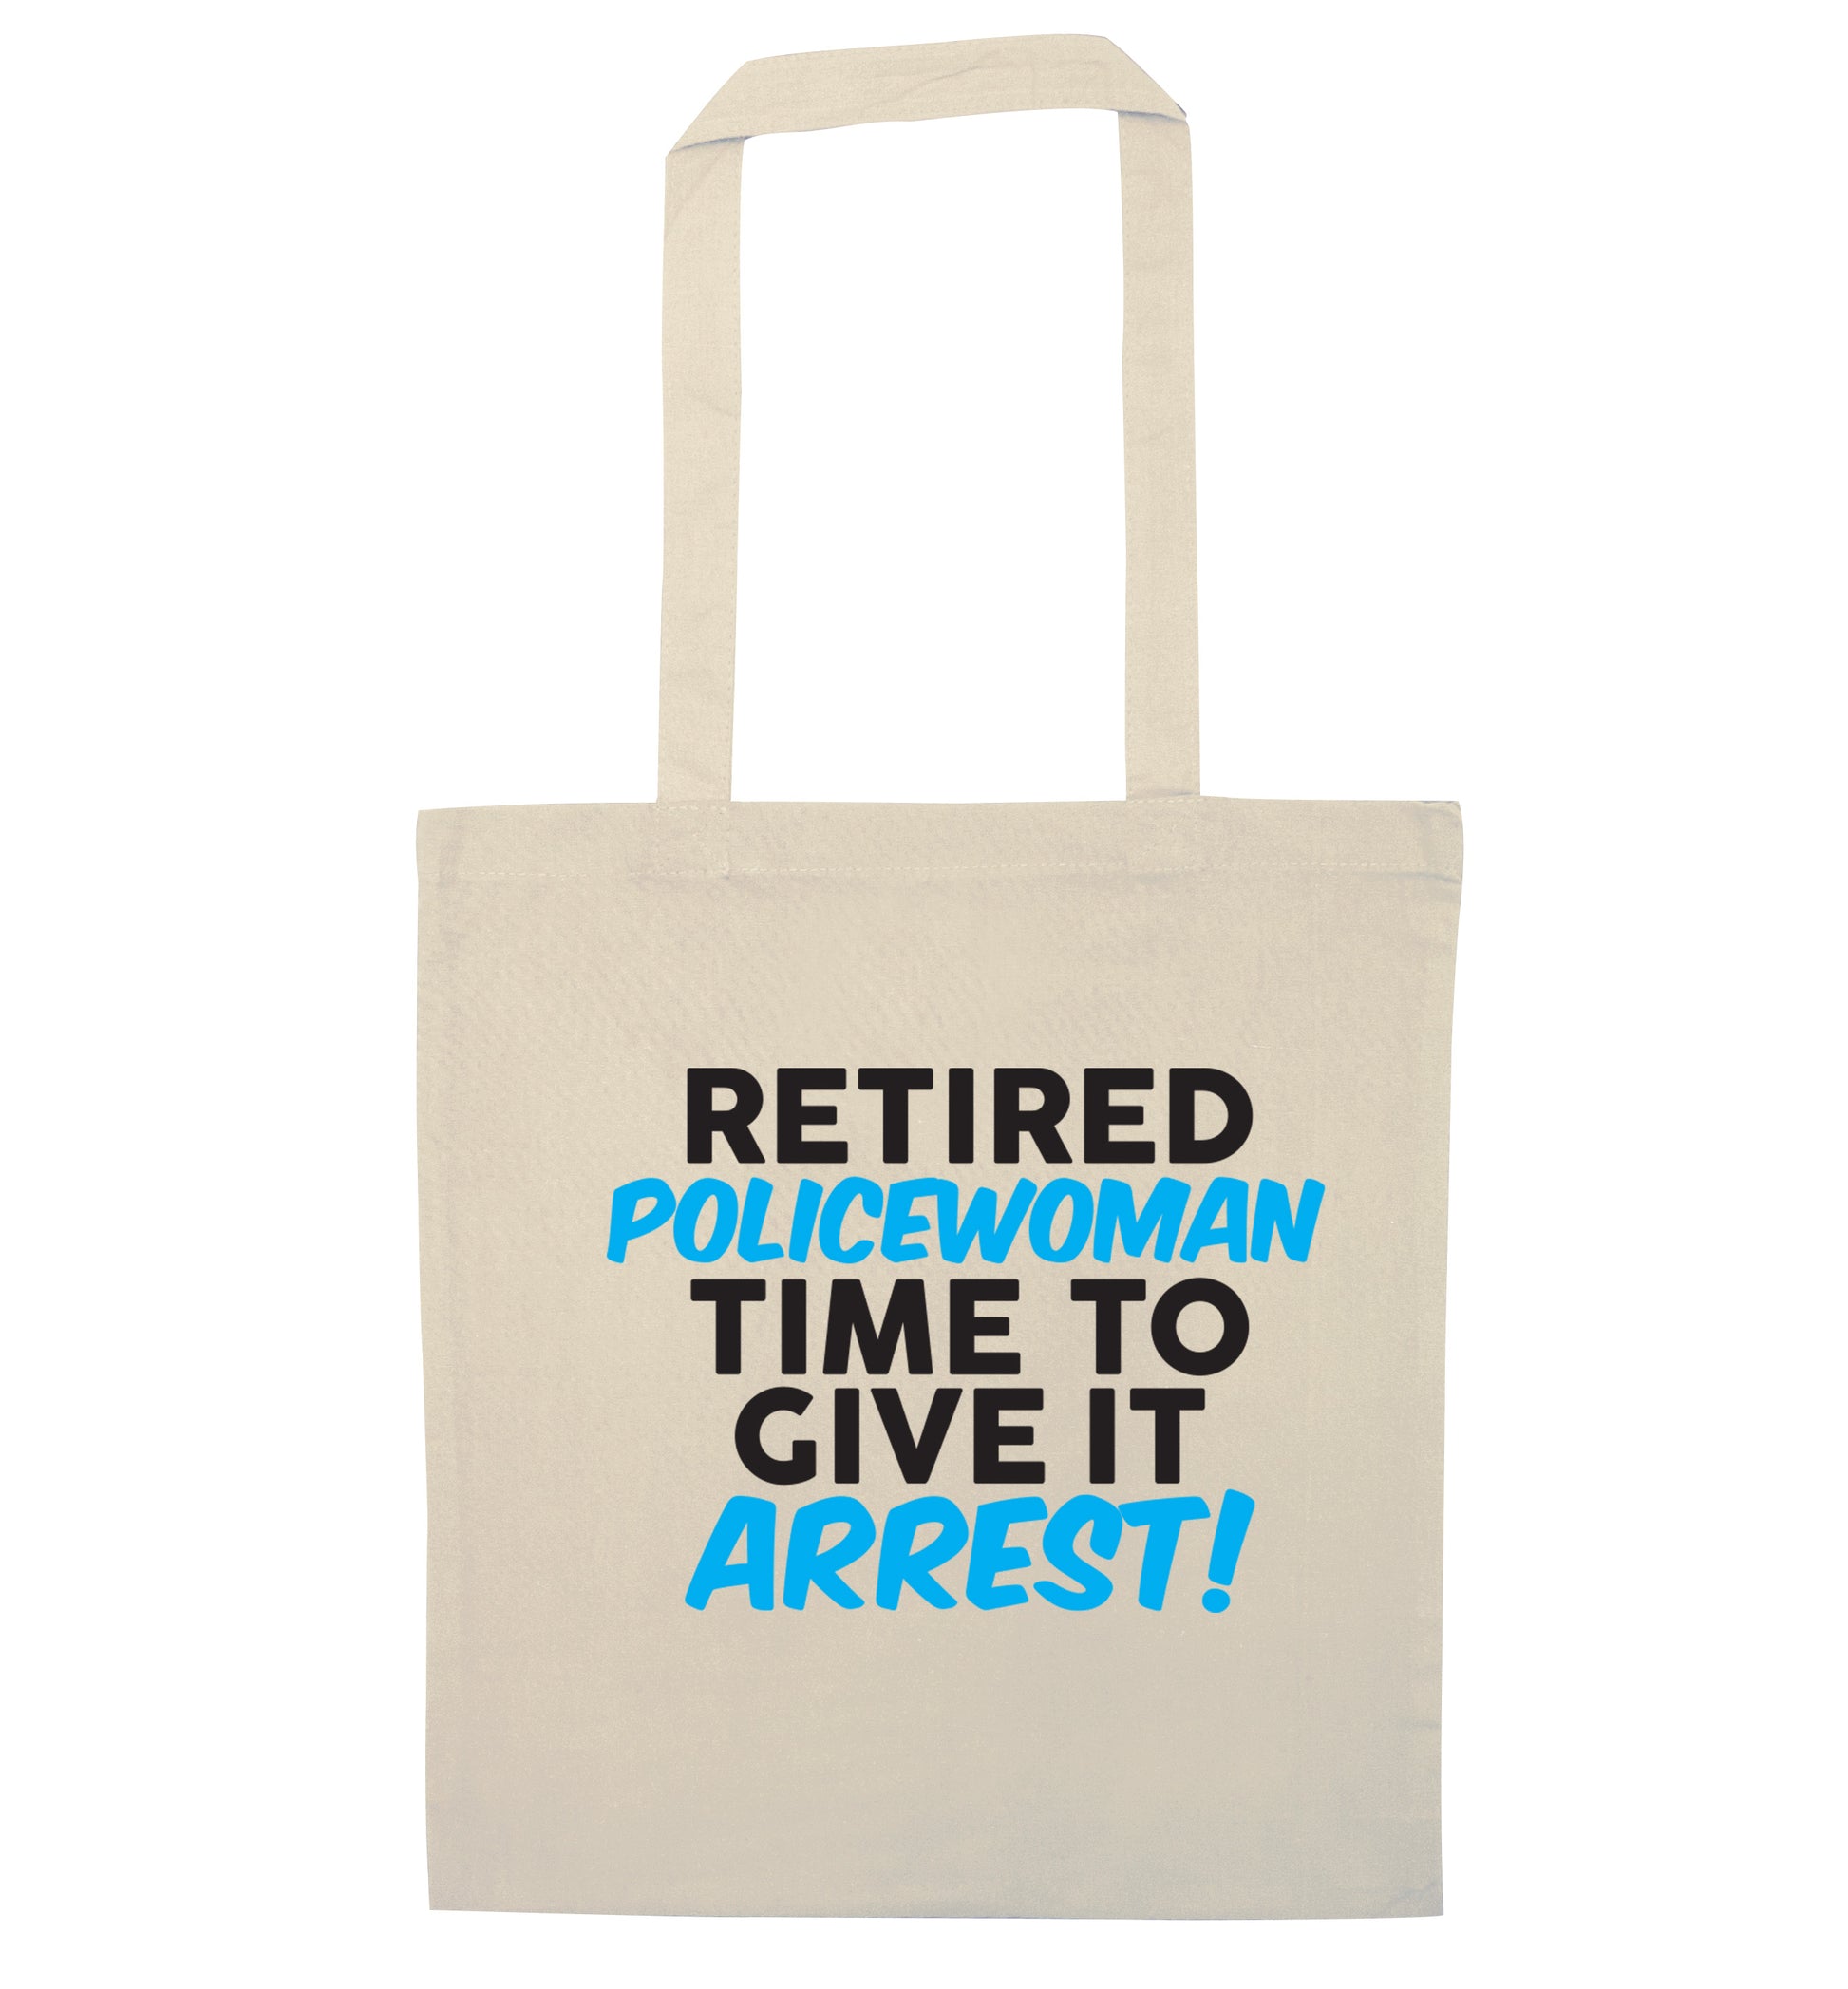 Retired policewoman time to give it arrest natural tote bag